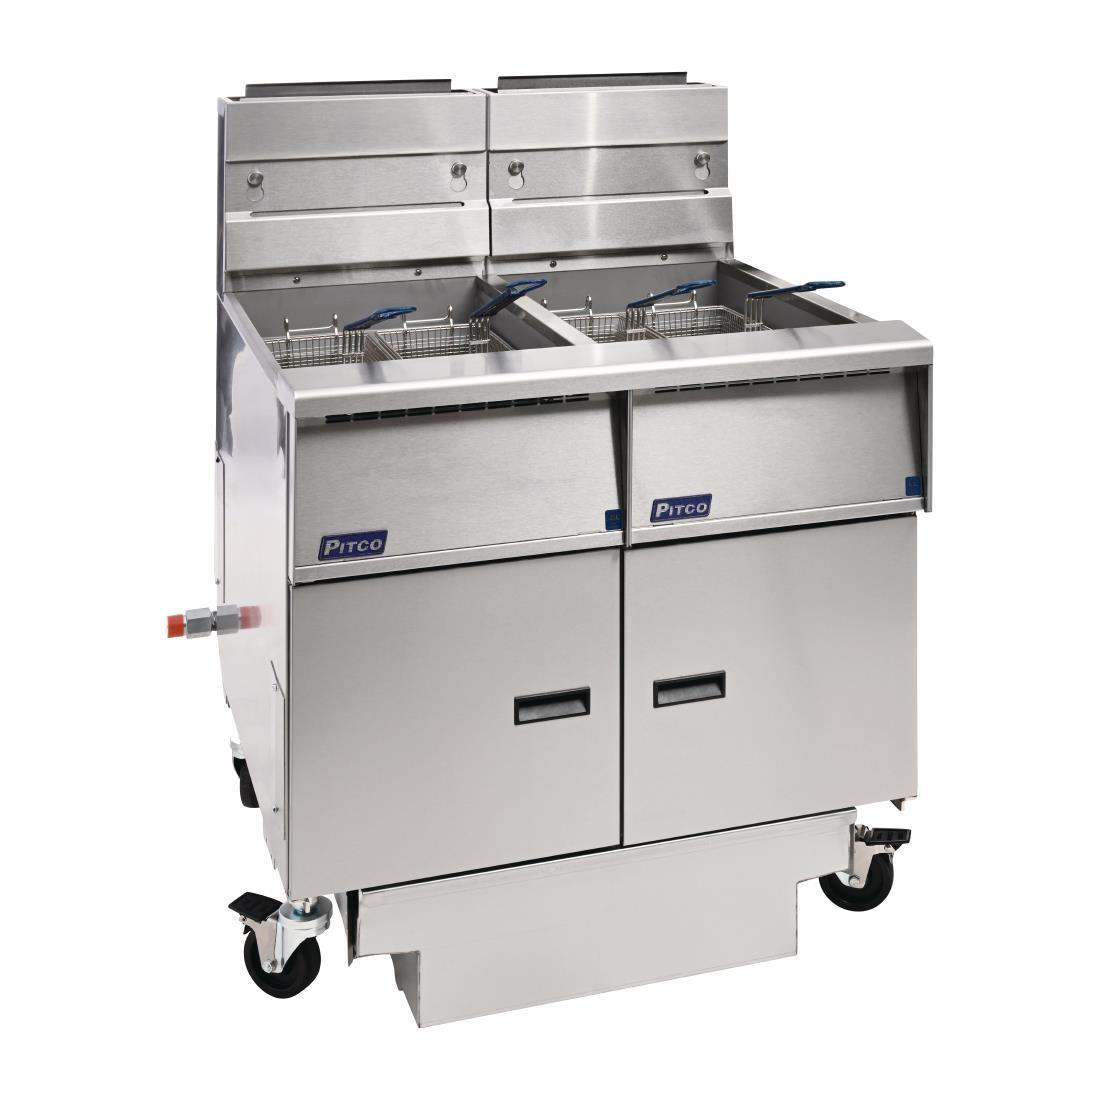 Pitco Twin Tank Solstice LPG Fryer with Filter Drawer SG14RS/FD-FF - FS128-P  - 2